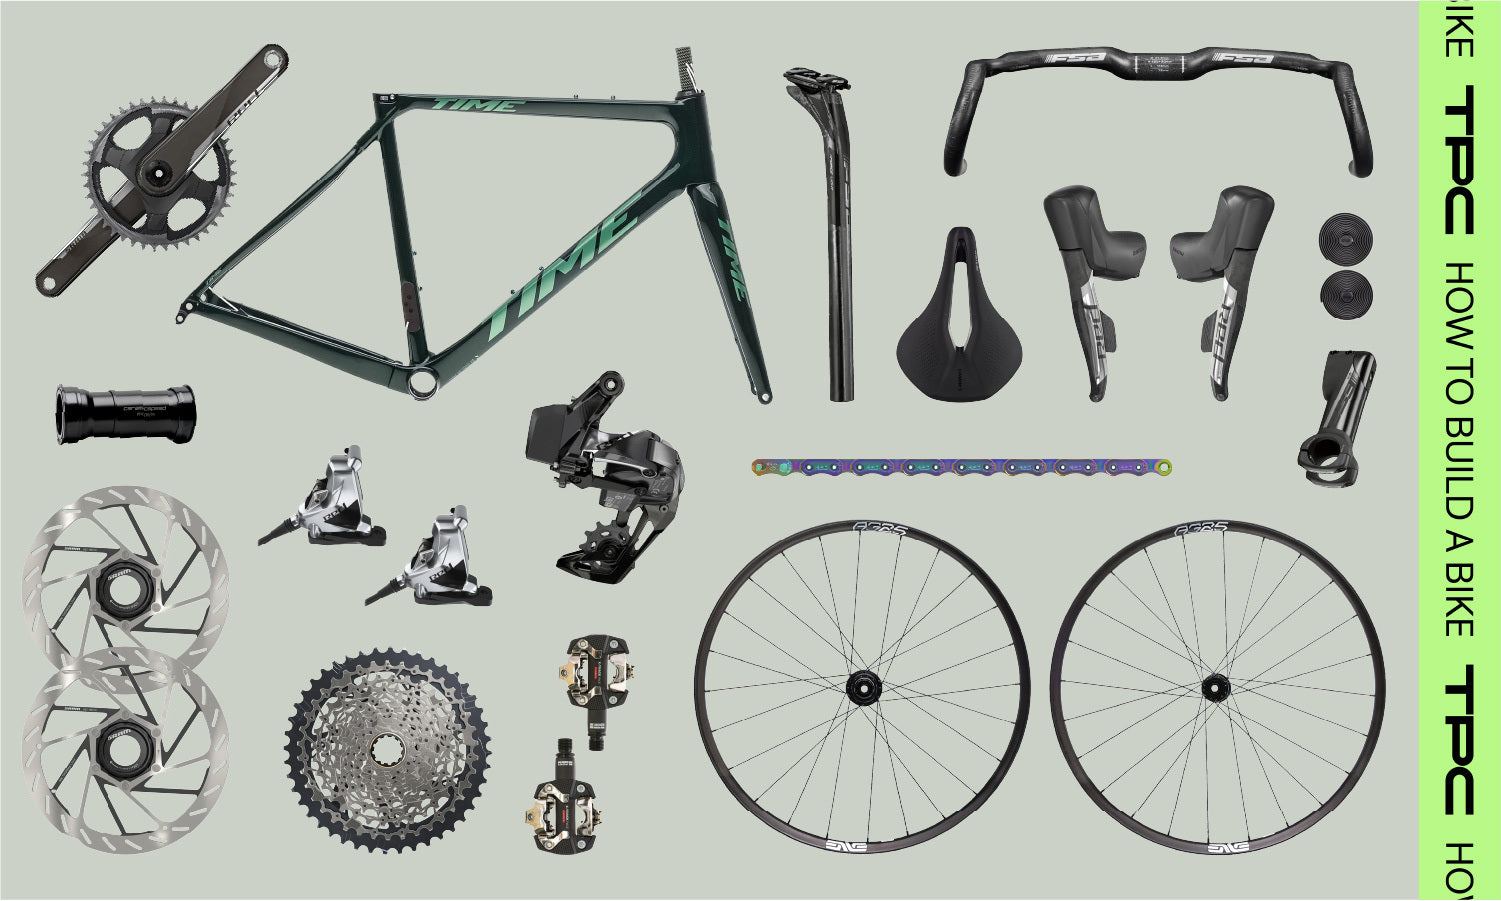 How To Build Your Own Bike From the Frame Up: The Pros and Cons of Custom